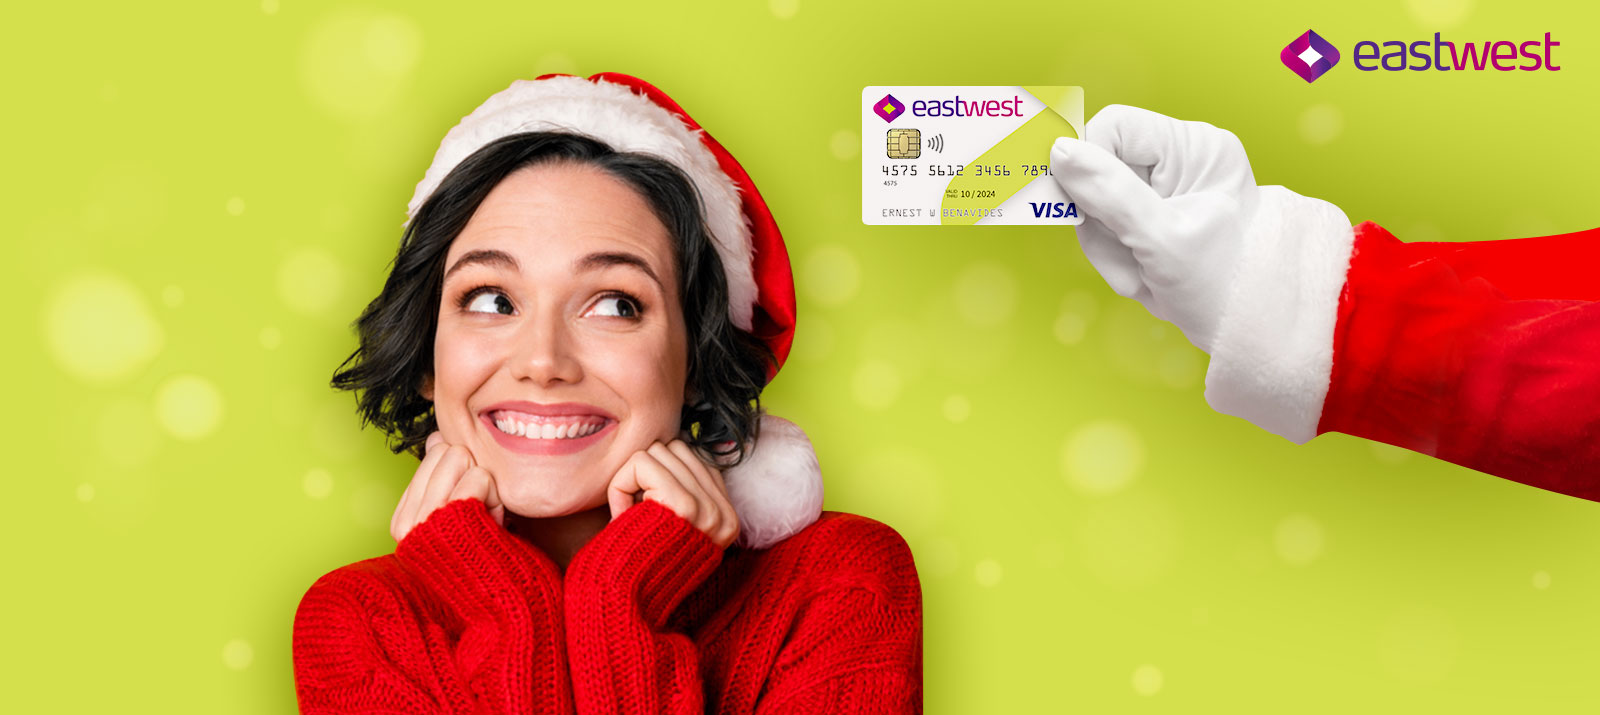 Make gift-giving easier this holiday season with the EastWest Visa Gift Card